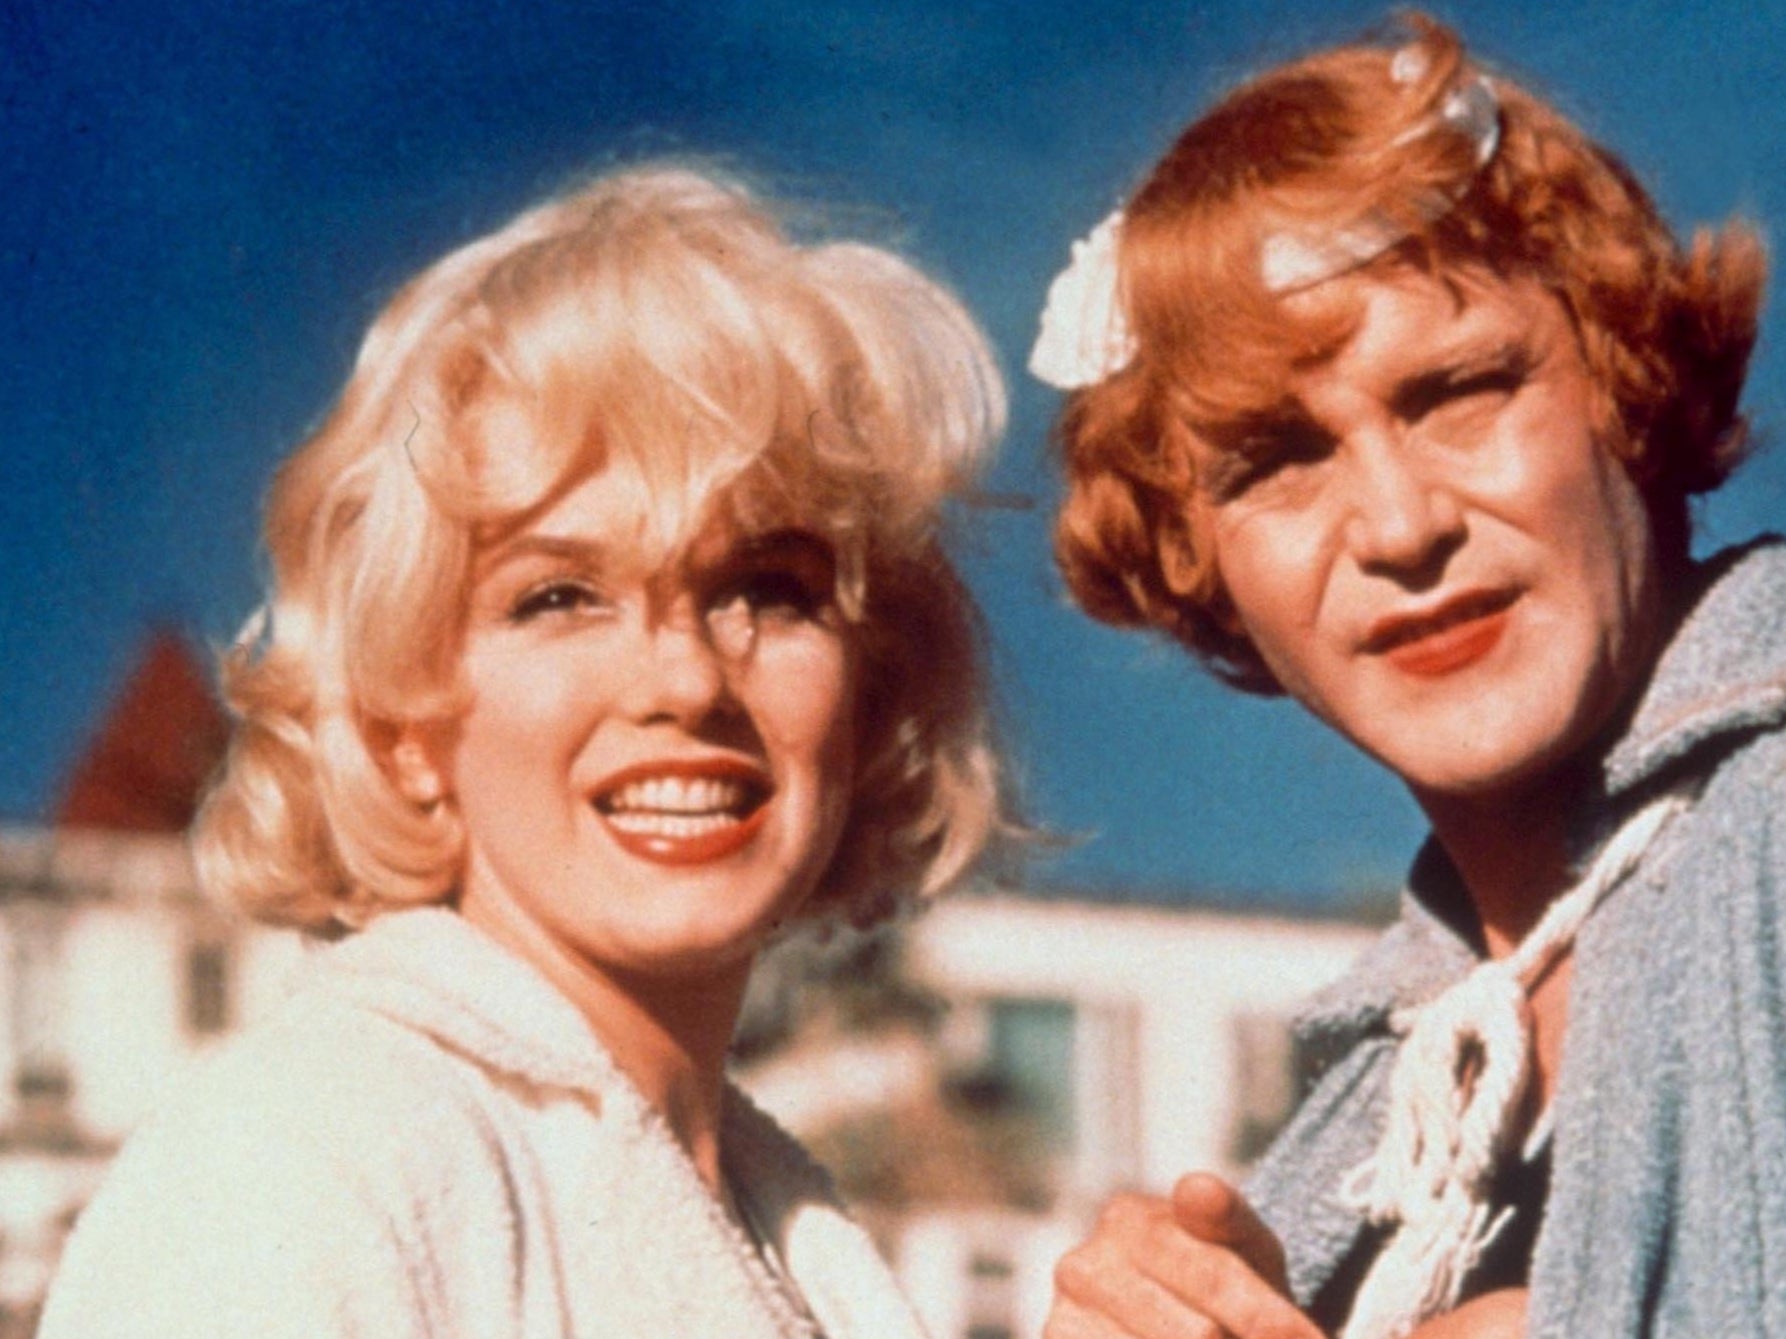 Marilyn Monroe and Jack Lemmon in Some Like it Hot